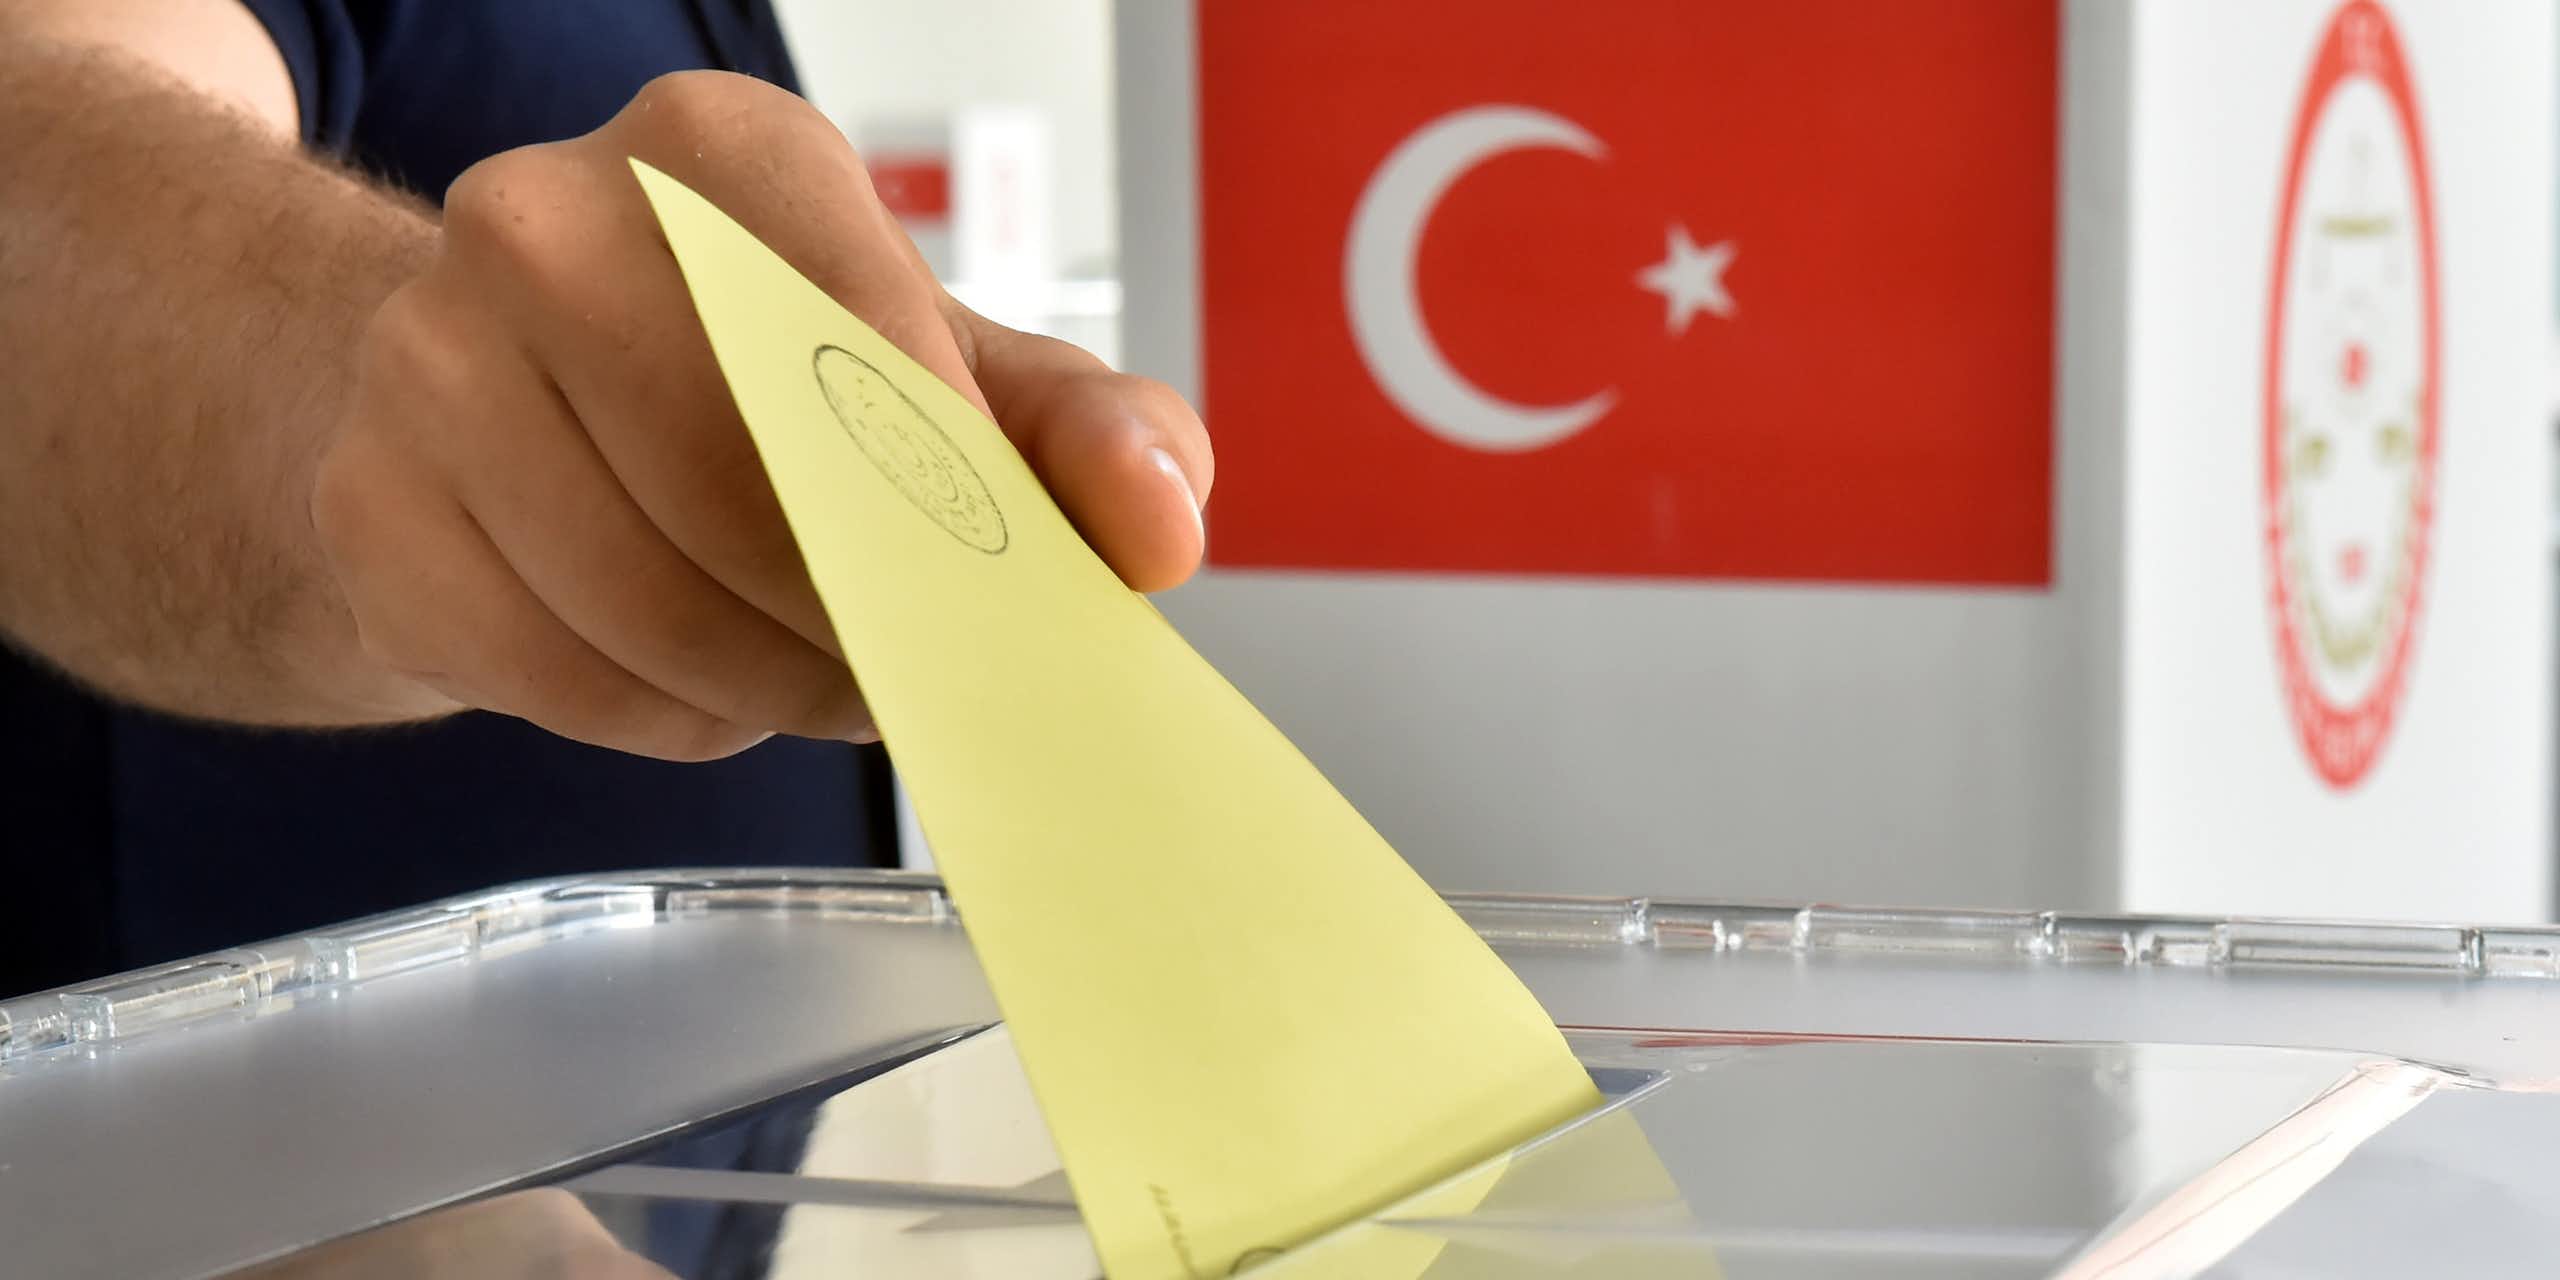 A man puts a ballot into a ballot box in front of the national flag of Turkey.